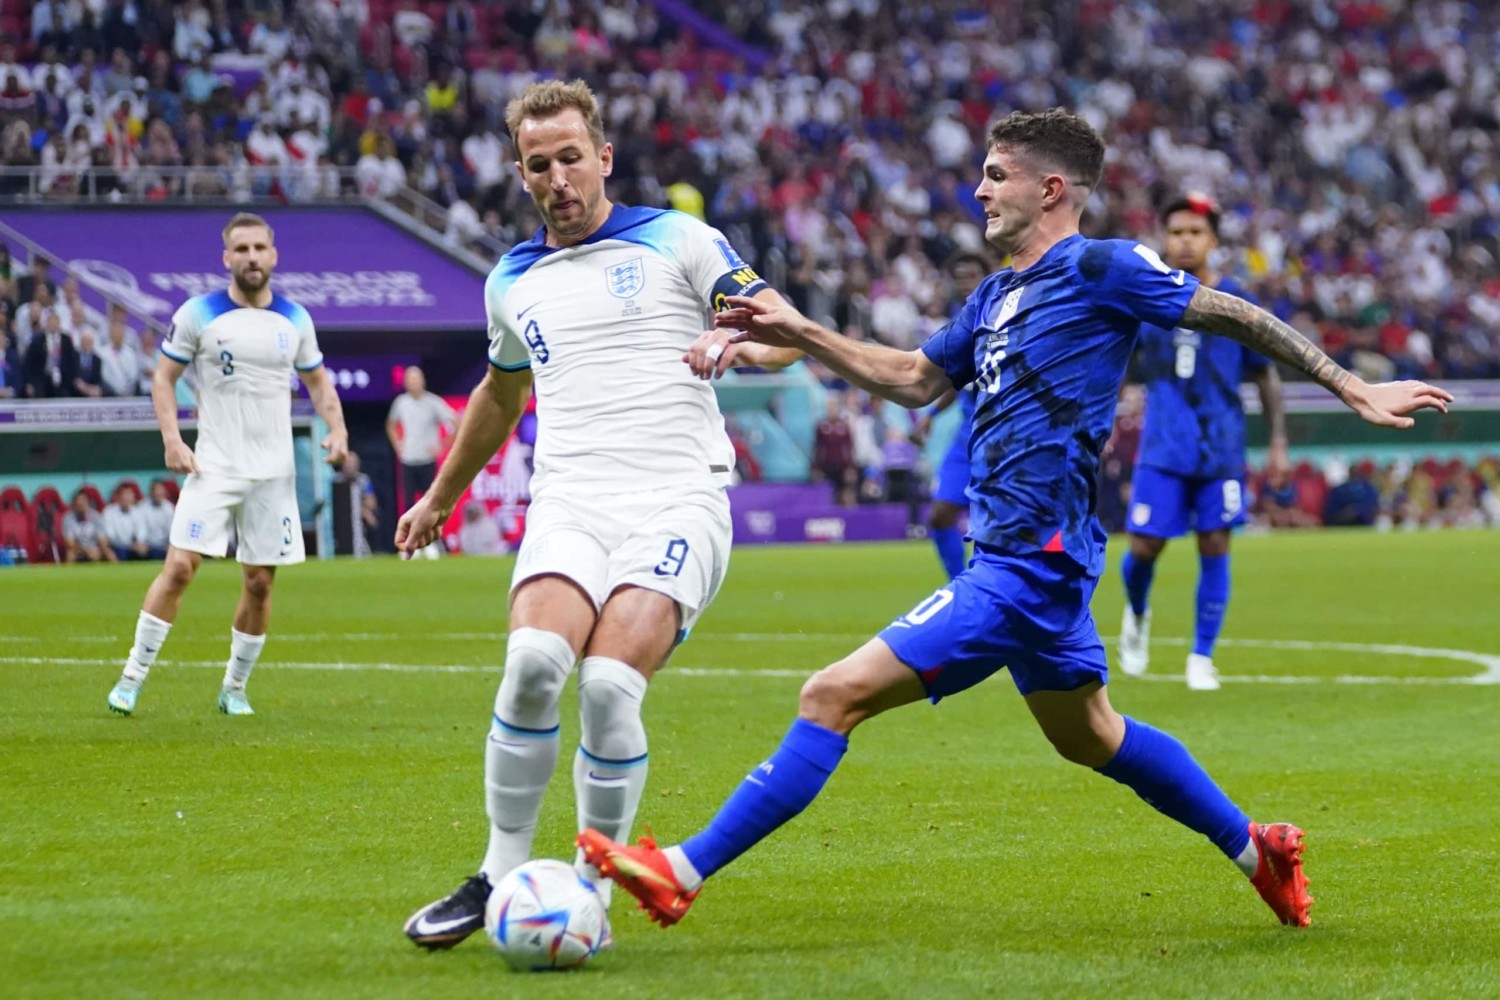 Christian Pulisic and Harry Kane compete for loose ball in match-up between United States and England in the World Cup